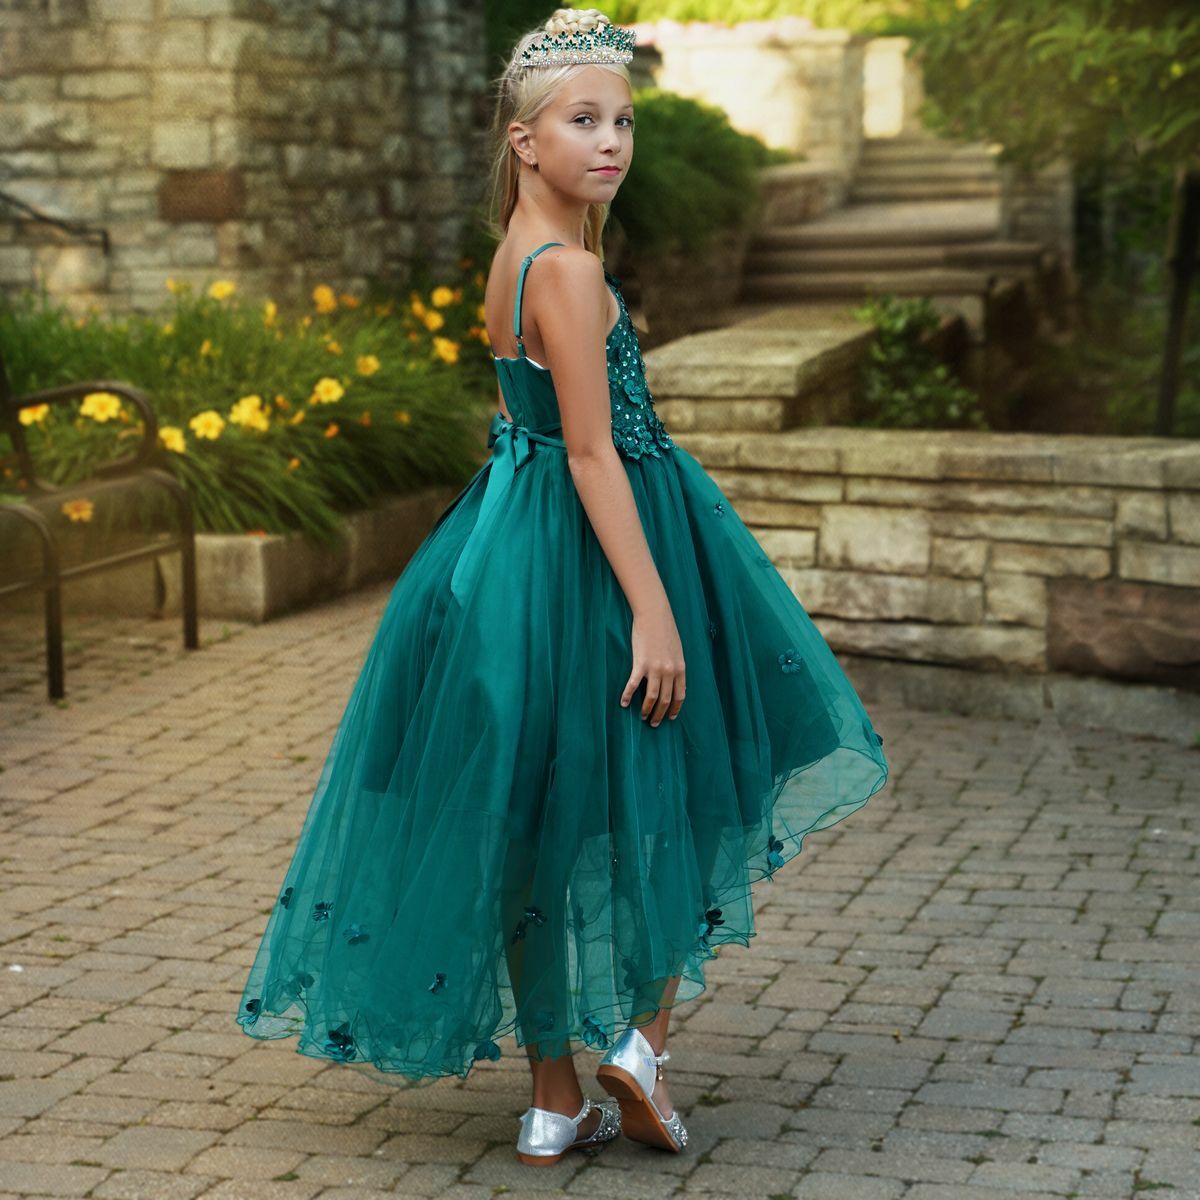 Helping Your Little Girl Develop Her Own Sense of Style – Sara Dresses